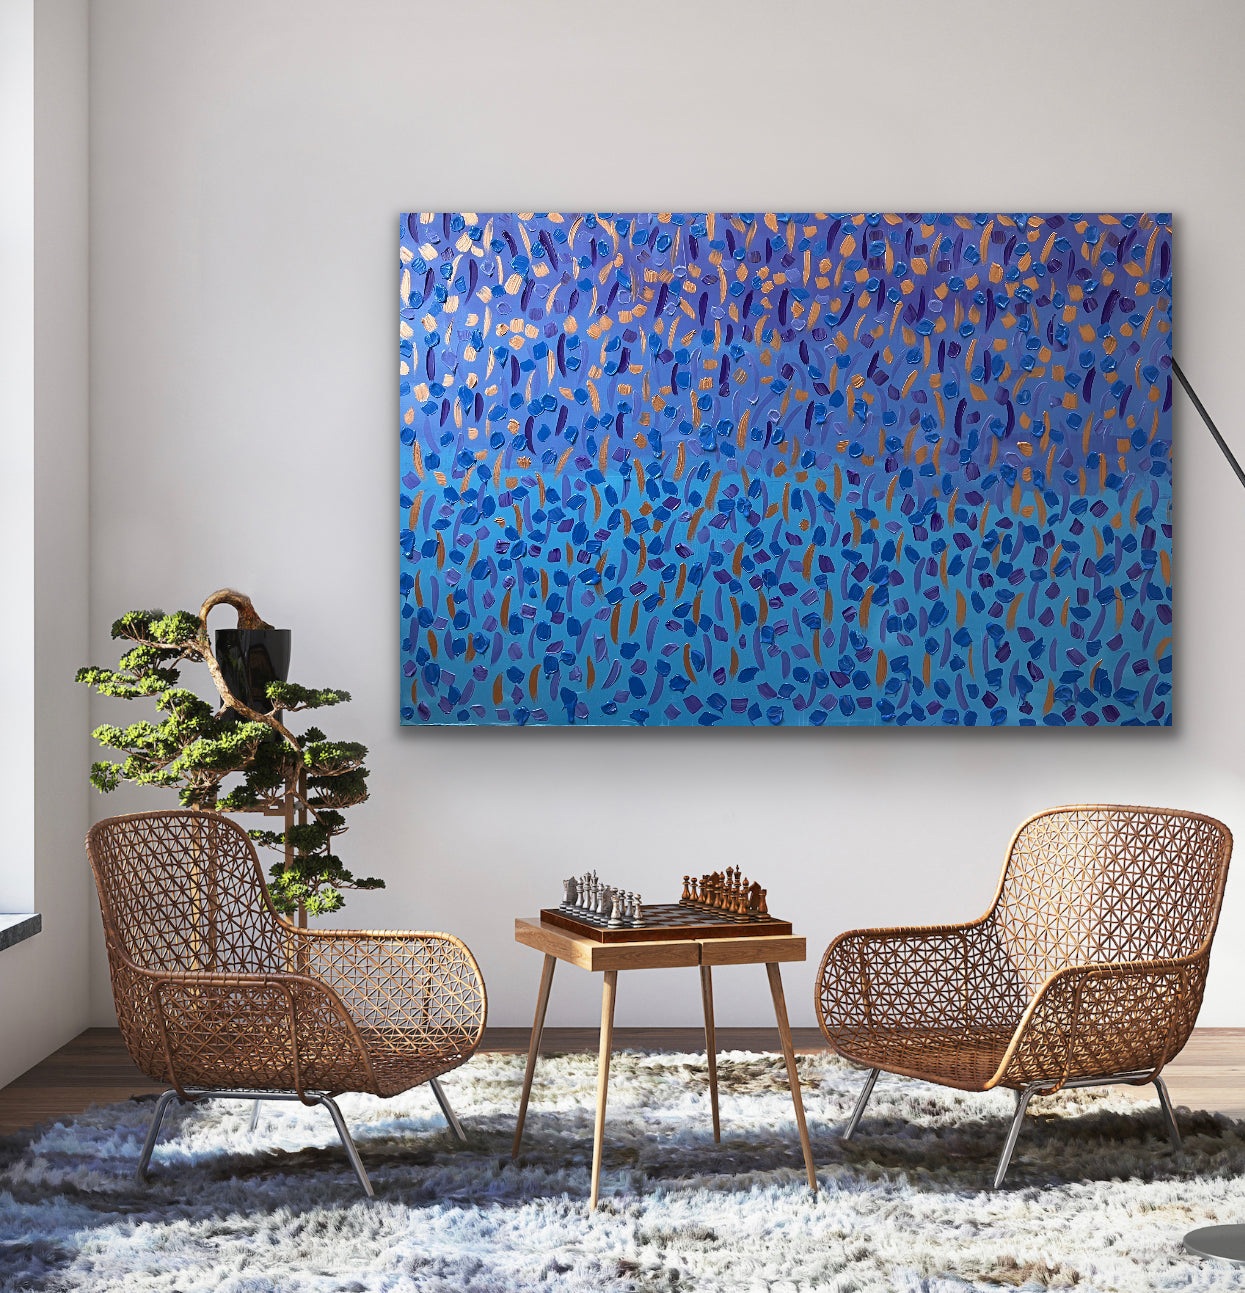 Fall 121.8 cm x 182.8 cm Baby Blue Textured Abstract Painting by Joanne Daniel